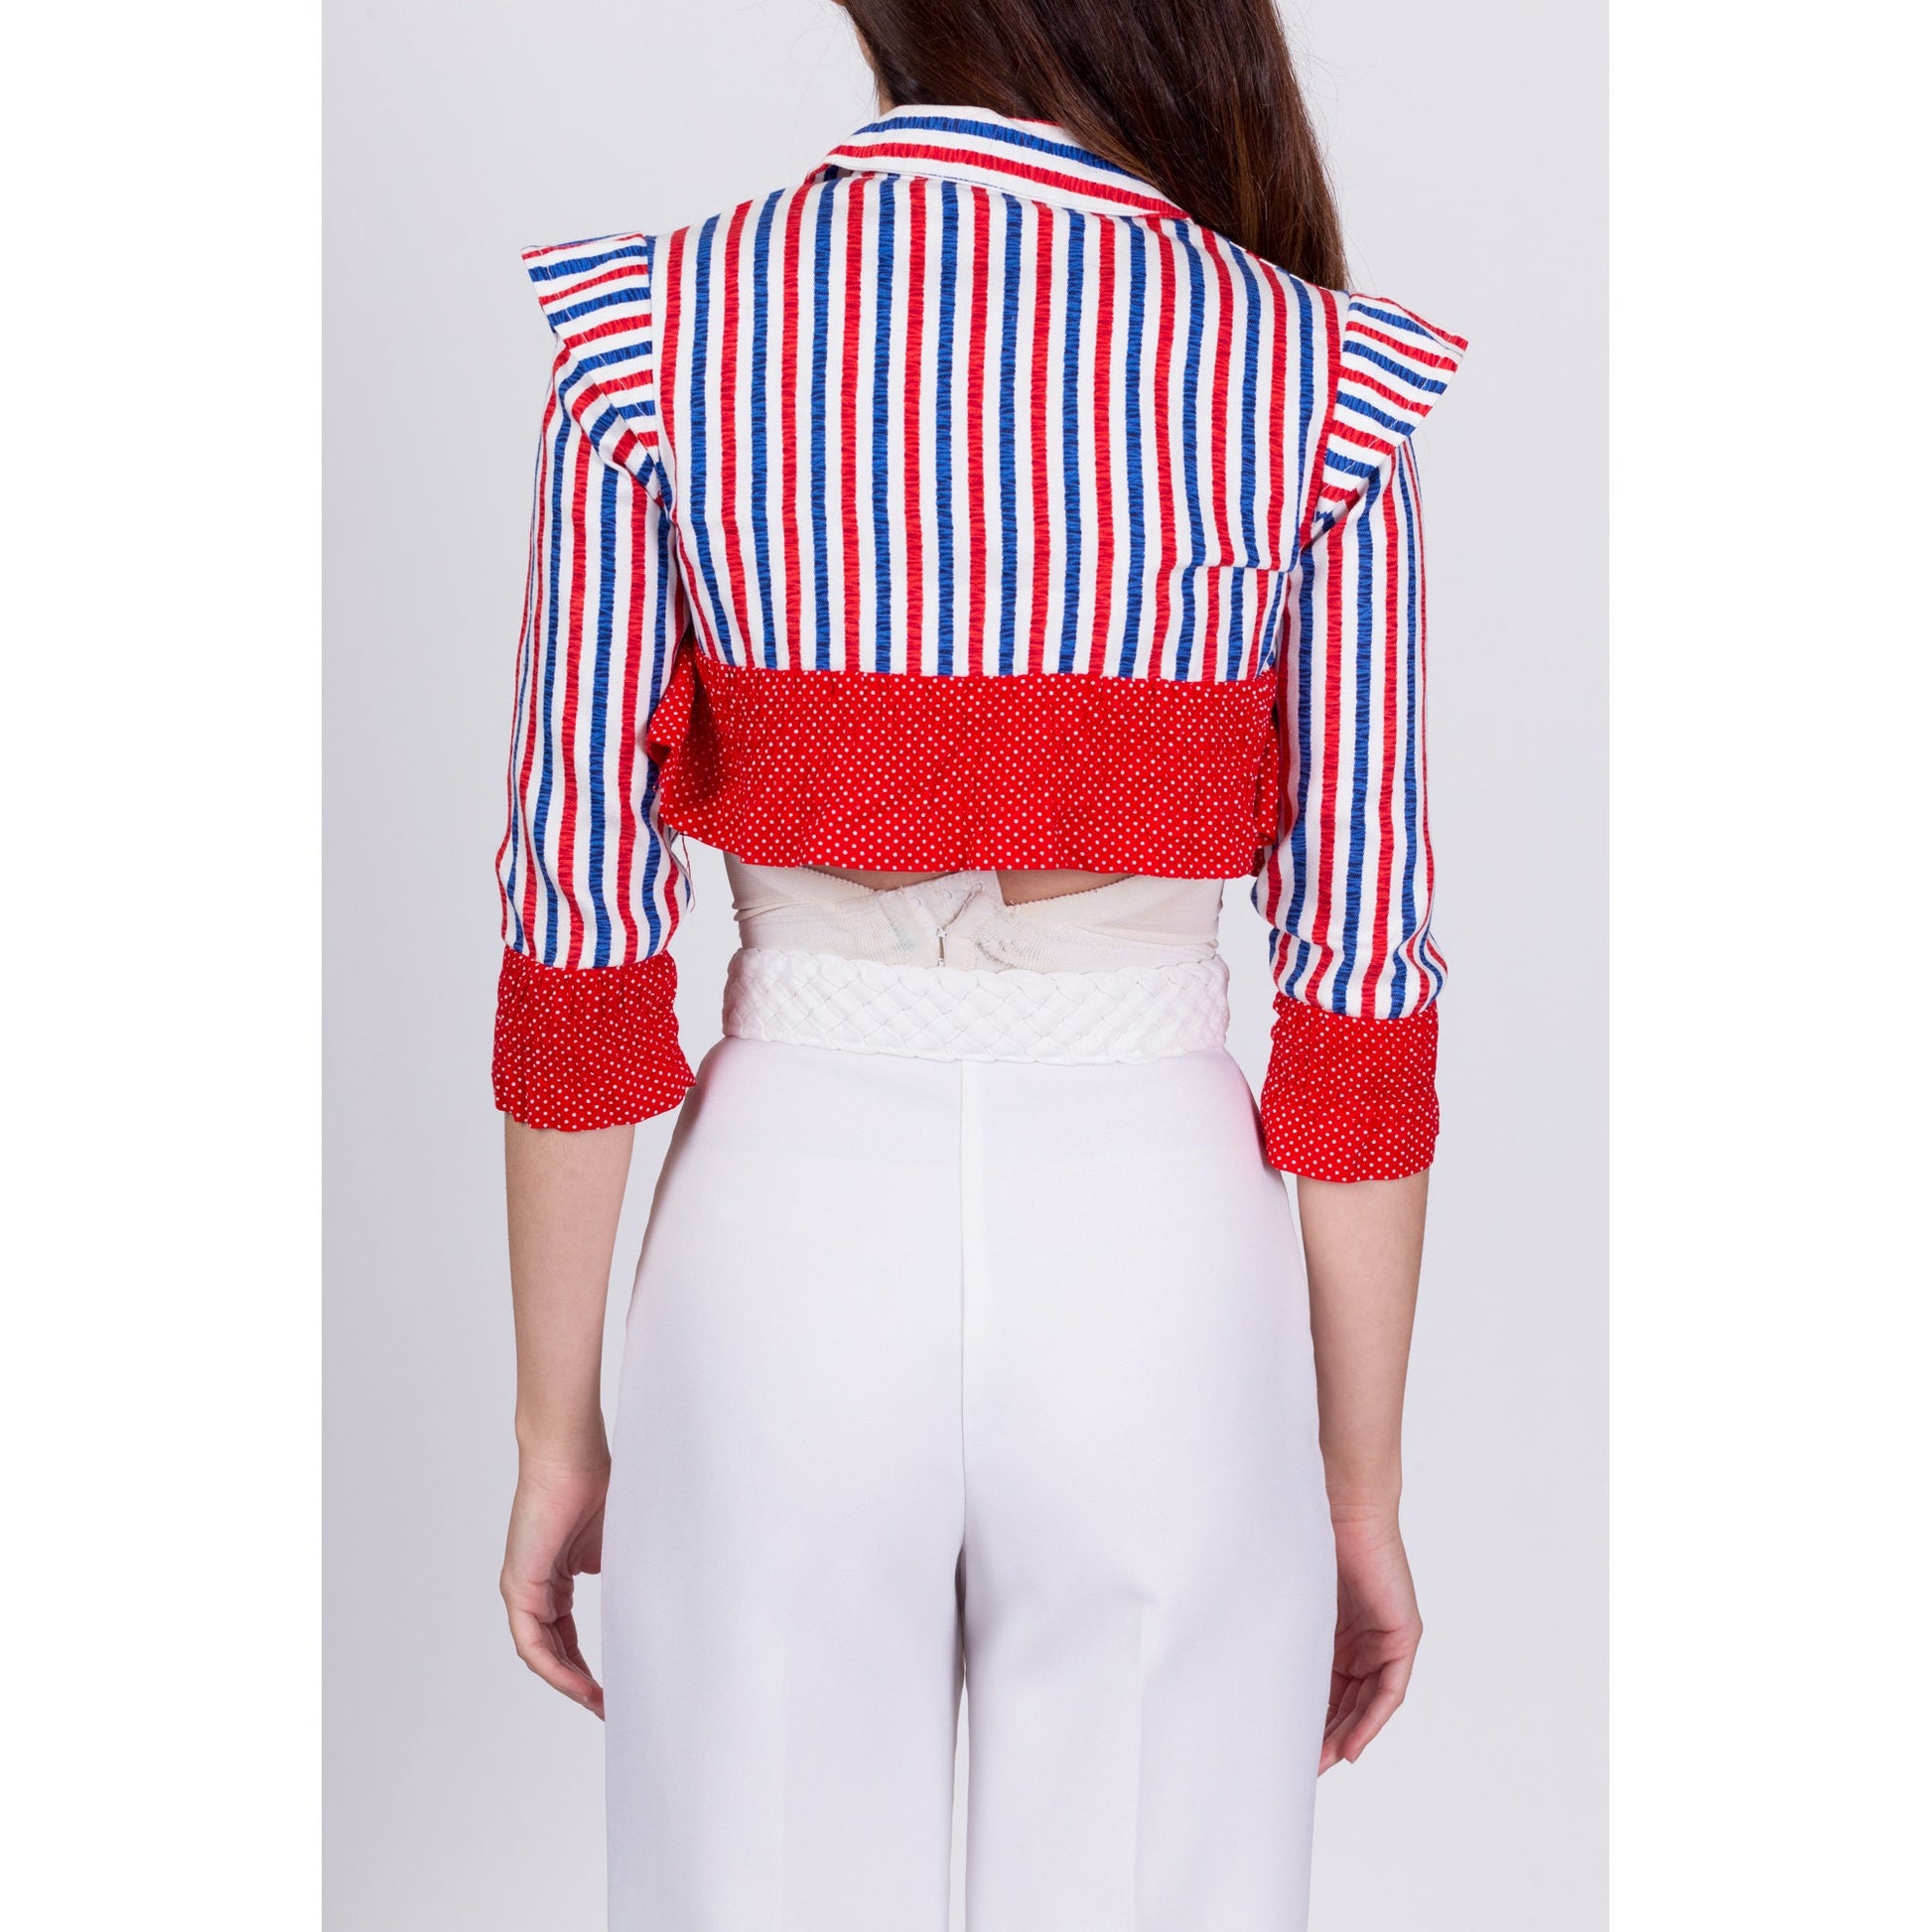 60s 70s Red White & Blue Striped Top - Girls Size 7 